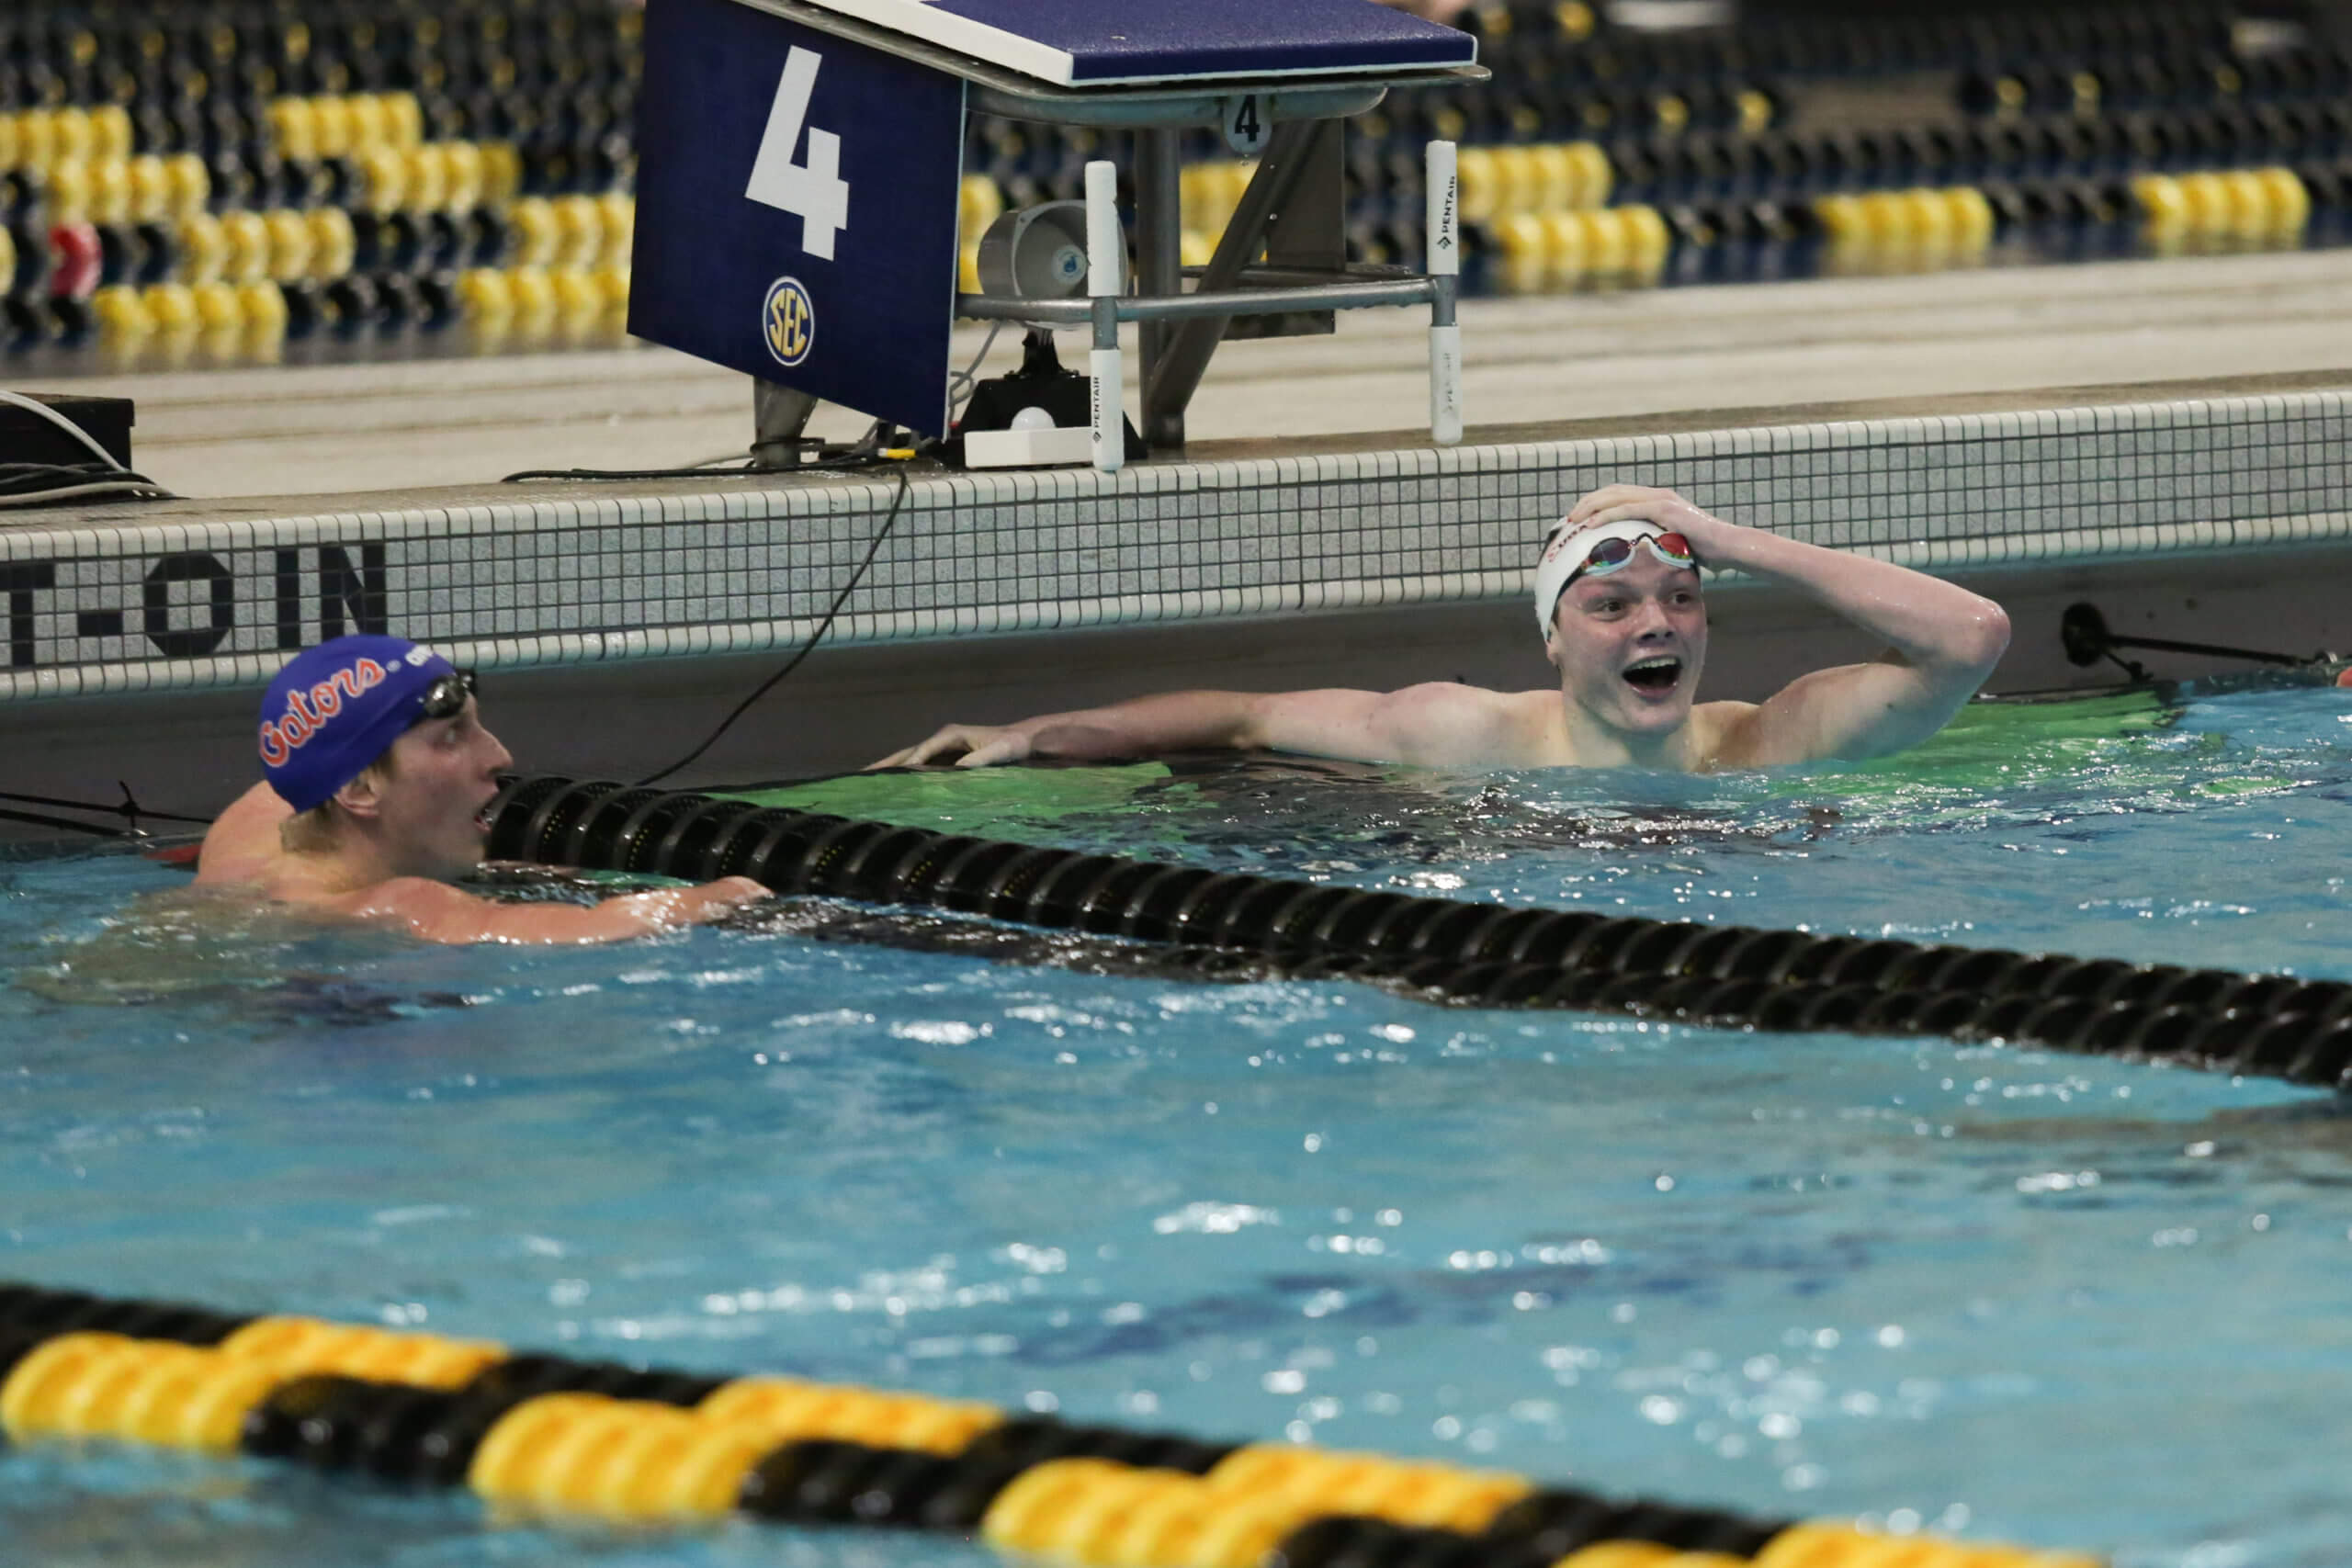 Images from the SEC swimming and diving championships Feb. 24, 2021 at MizzouRec in Columbia, Missouri.